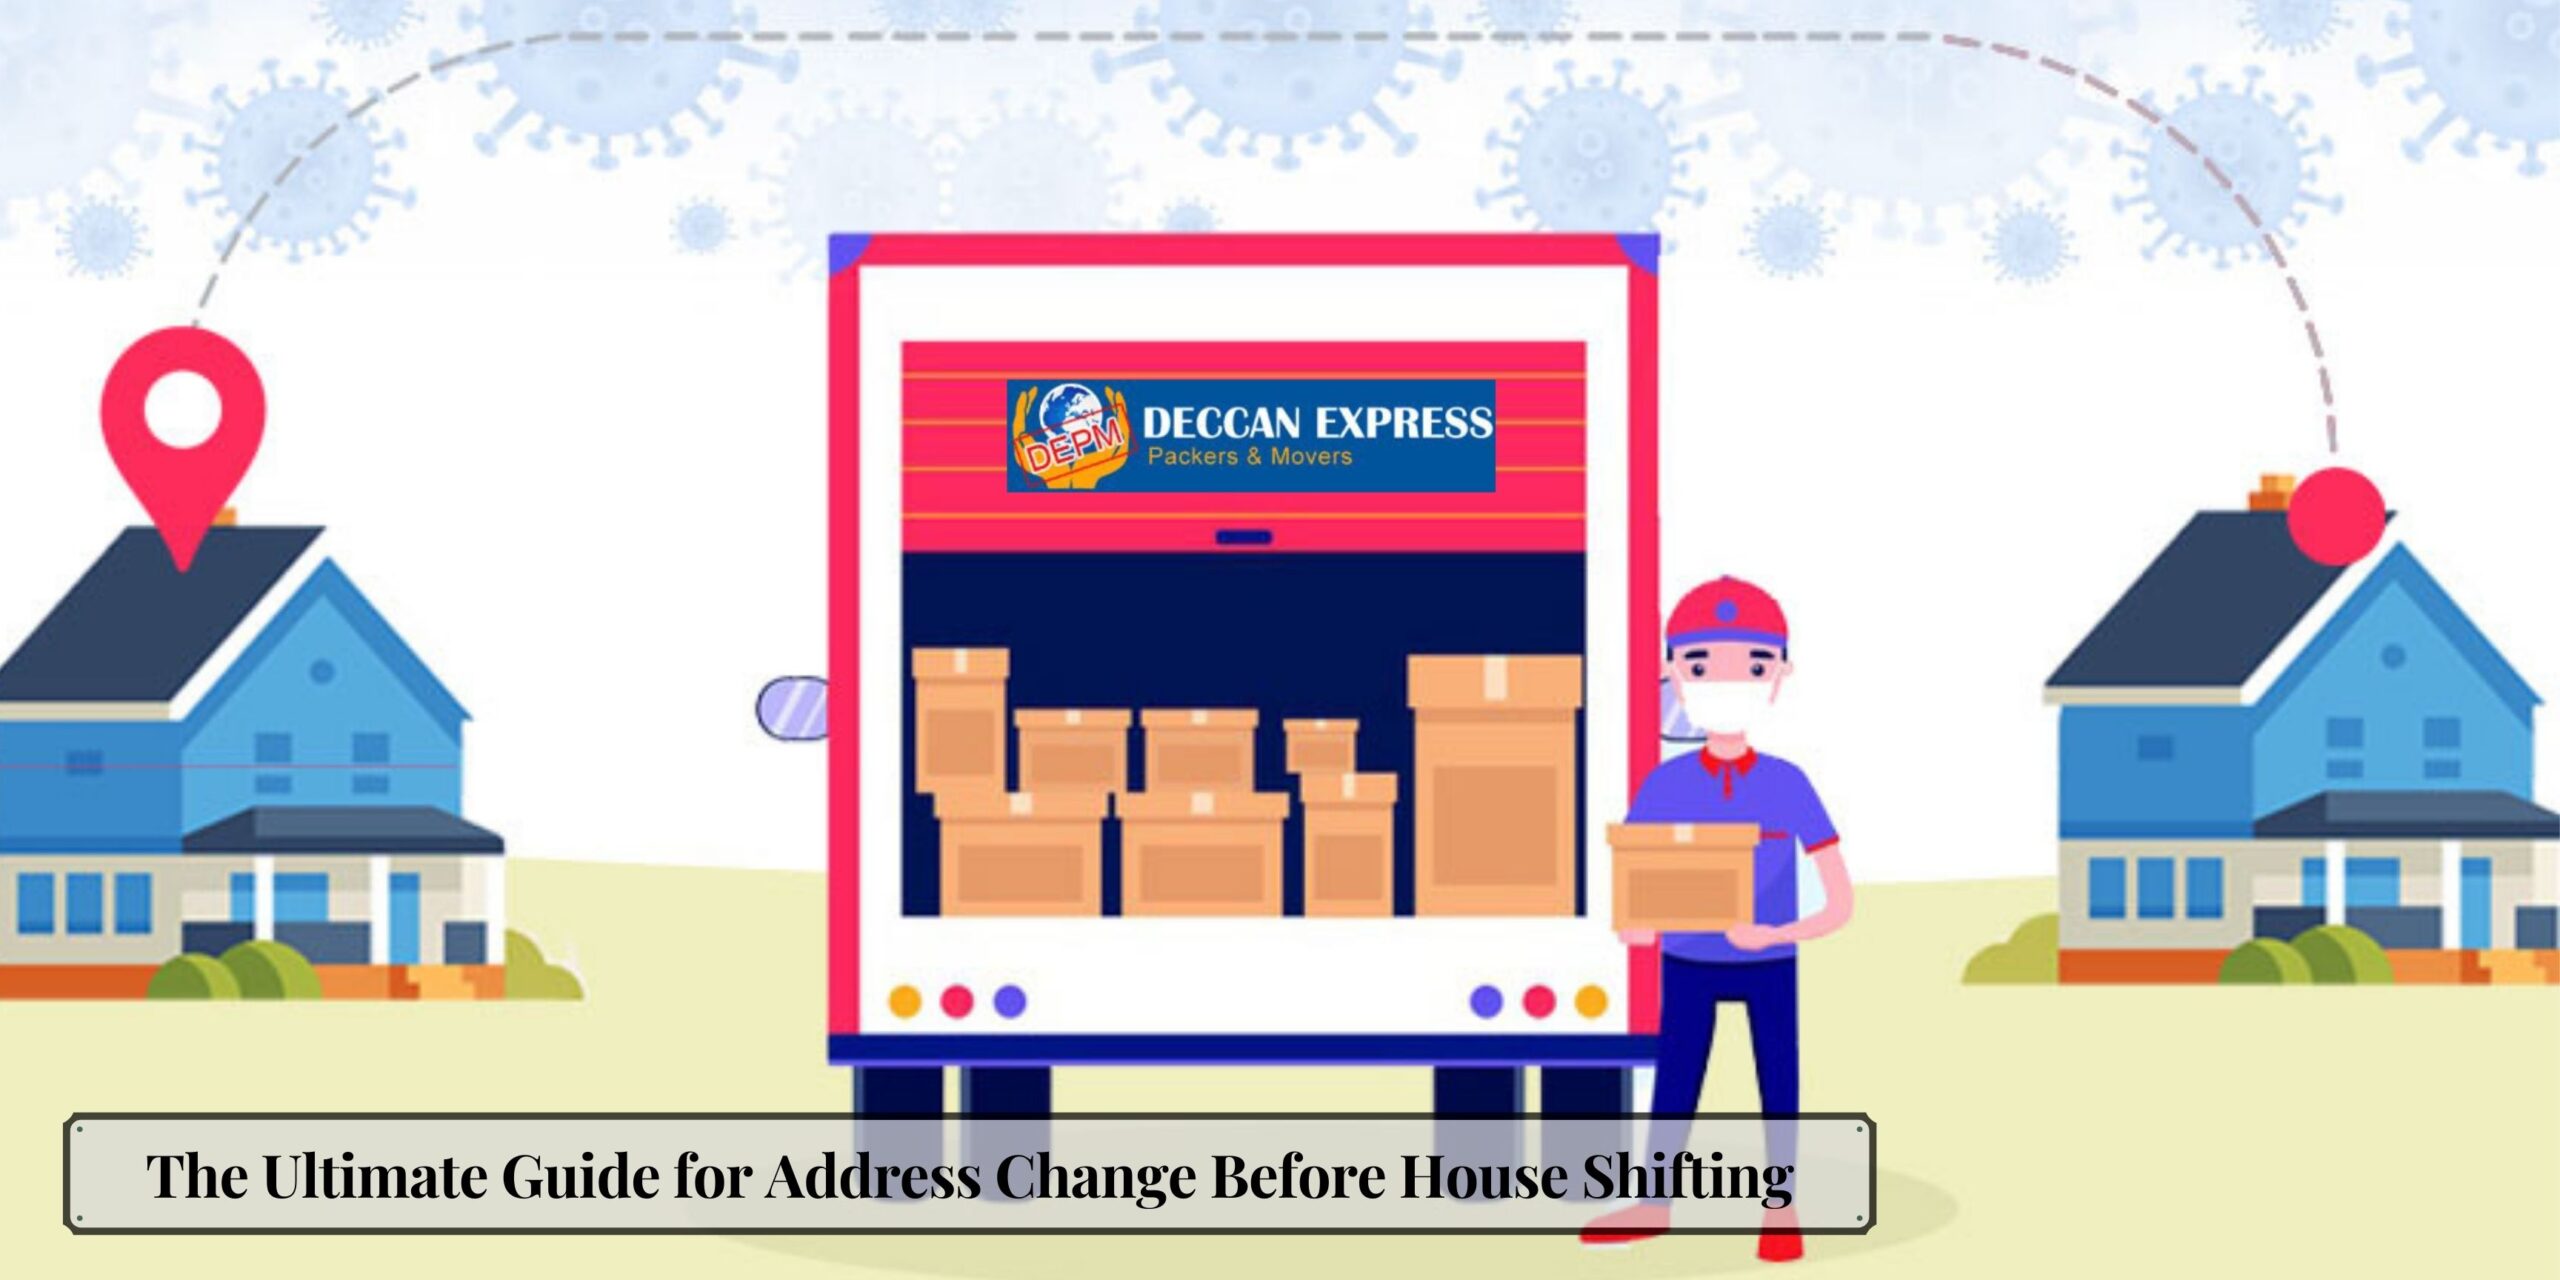 The Ultimate Guide for Address Change Before House Shifting